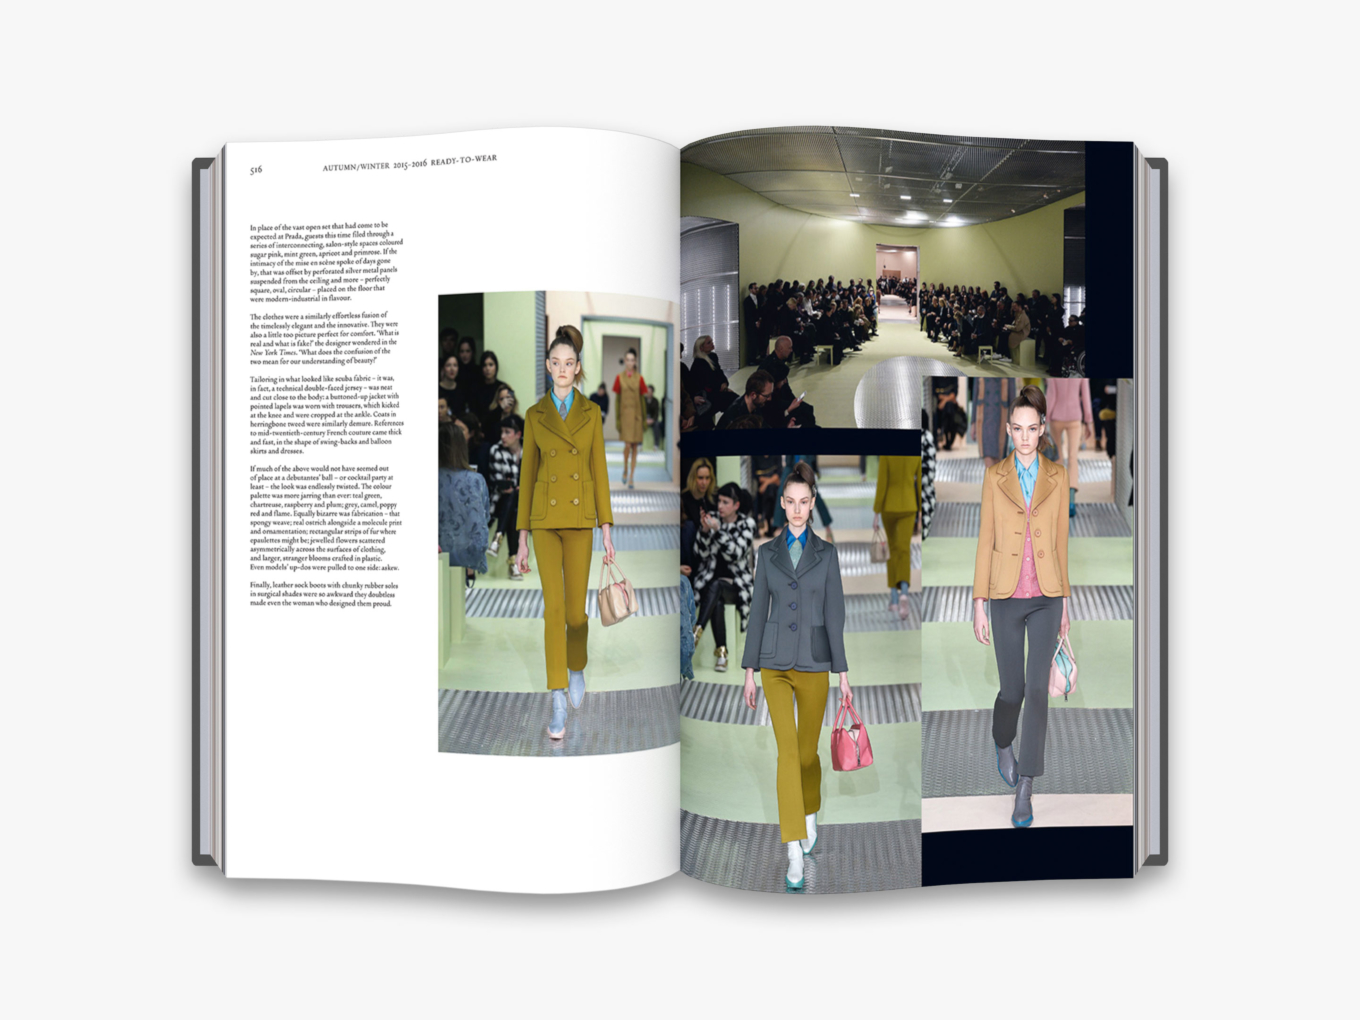 By Susannah Frankel from Prada Catwalk: The Complete Collections copyright Thames & Hudson 2019